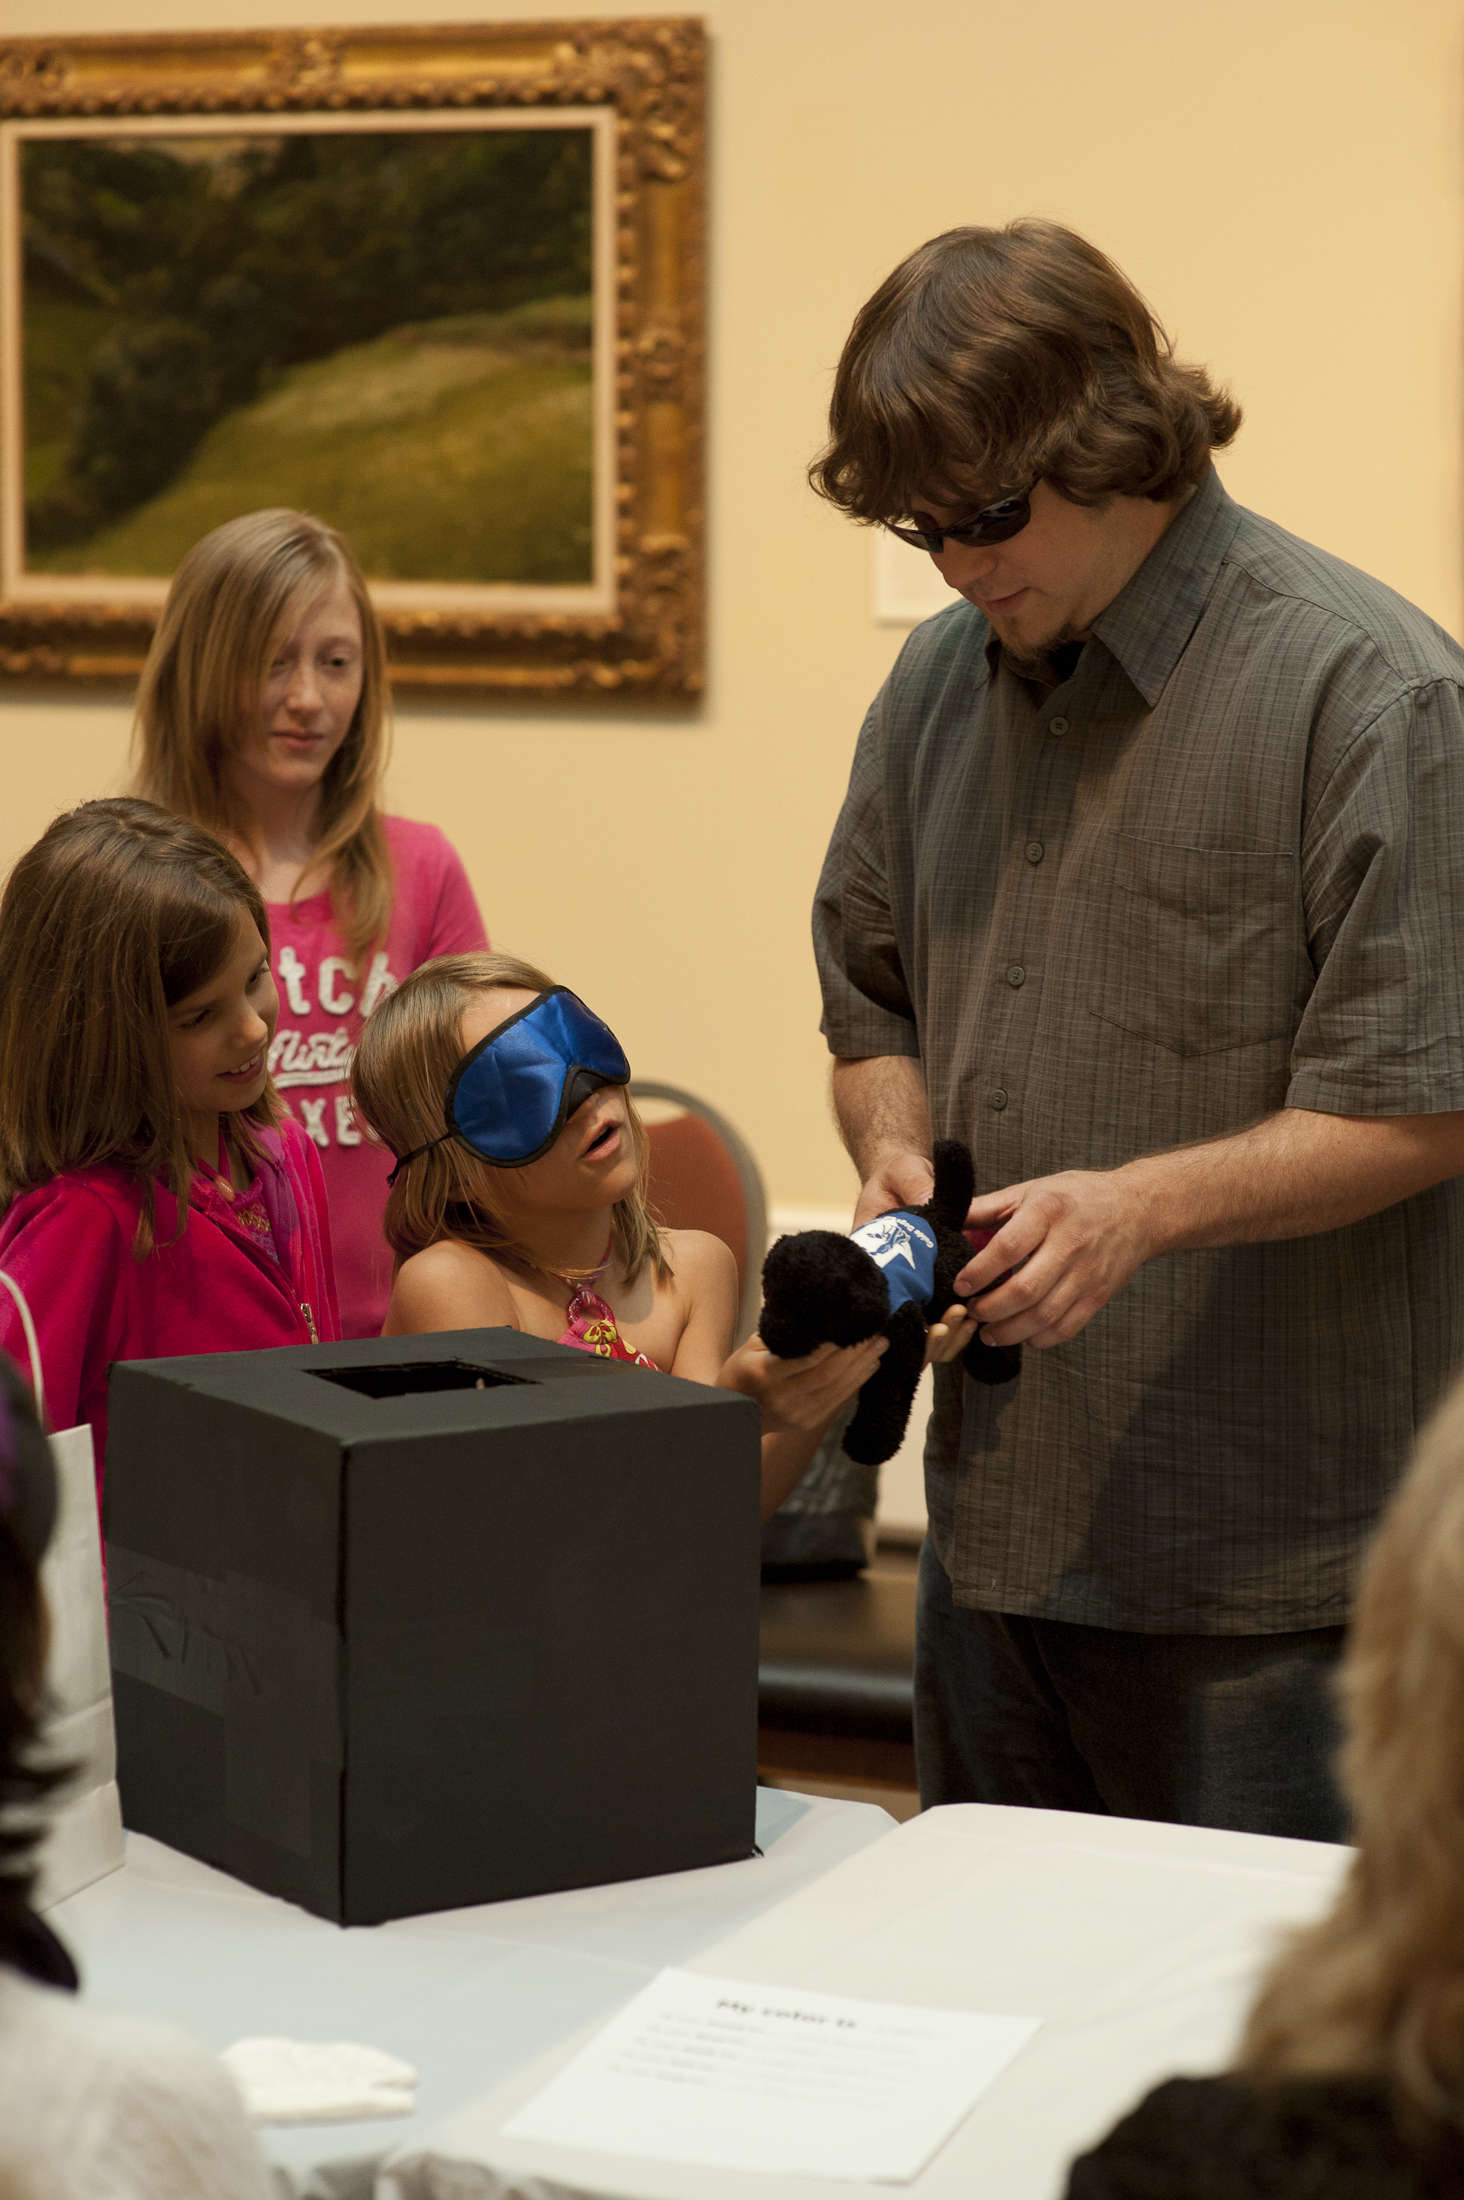 At SMU's Community Day at Meadows Museum, families will experience art through the sense of touch at presentations by Denton artist John Bramblitt, who is legally blind.